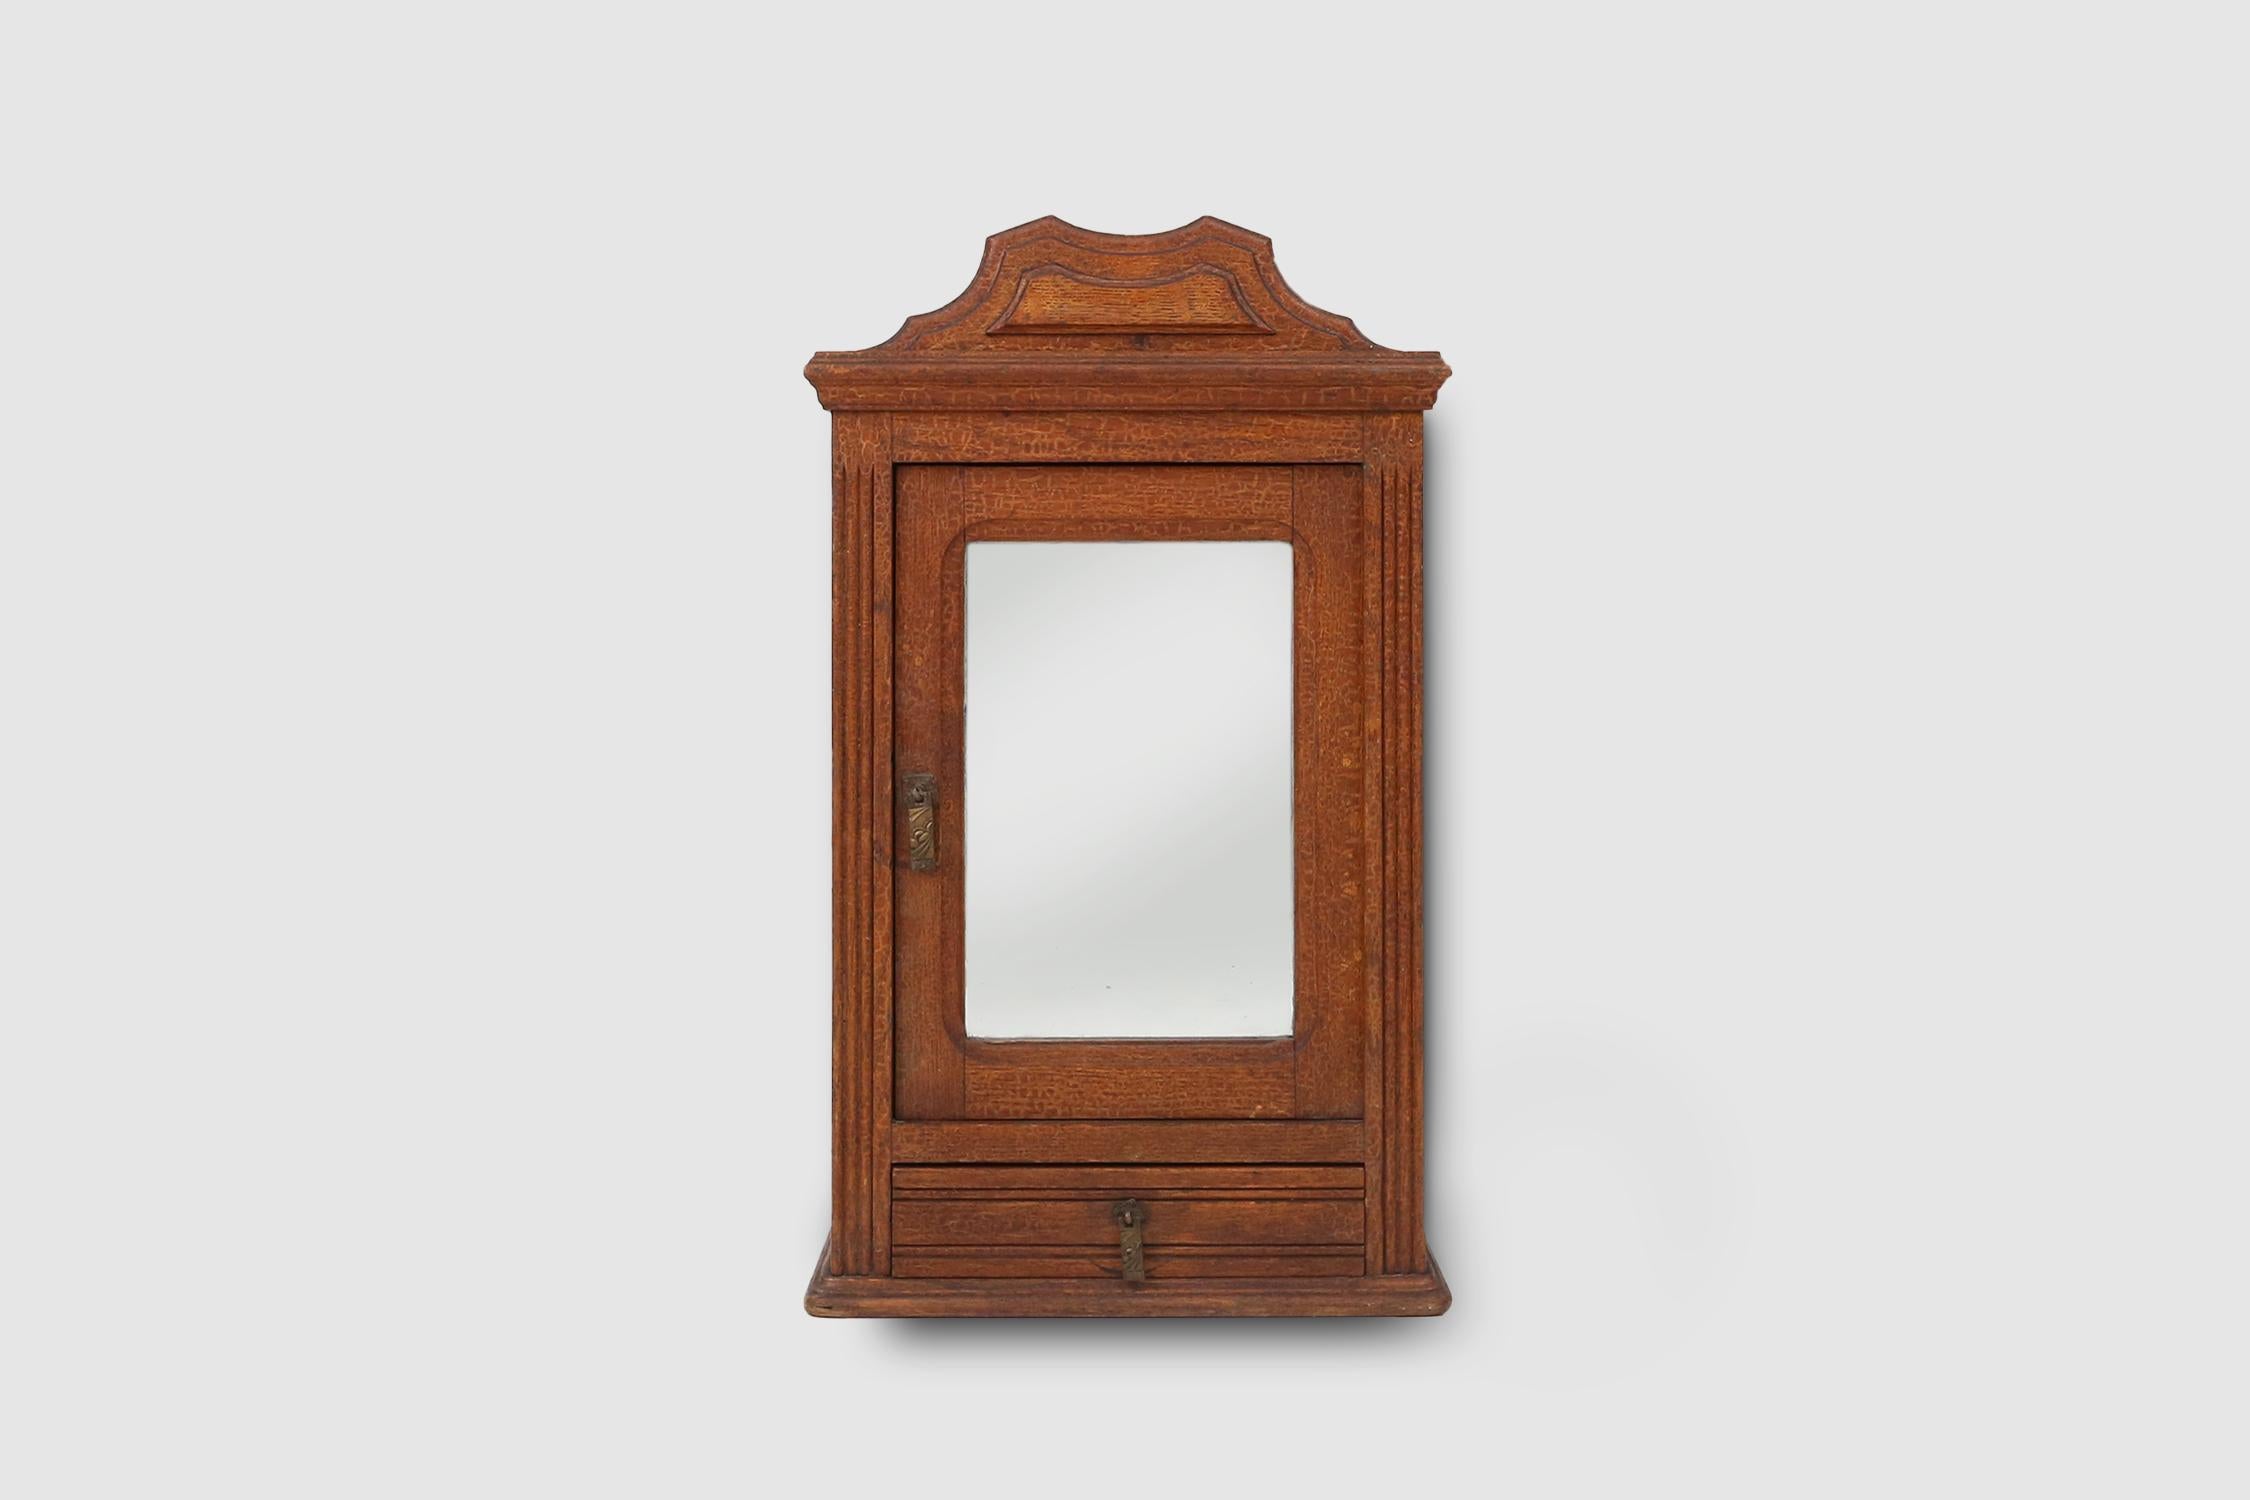 France / 1900 / medicine or shaving cabinet / wood and mirror / rustic / mid-century

Elegant medicine or shaving cabinet made in France, ca. 1900. The small cabinet has a mirrored door and a small drawer below. Both with beautiful art deco handles.